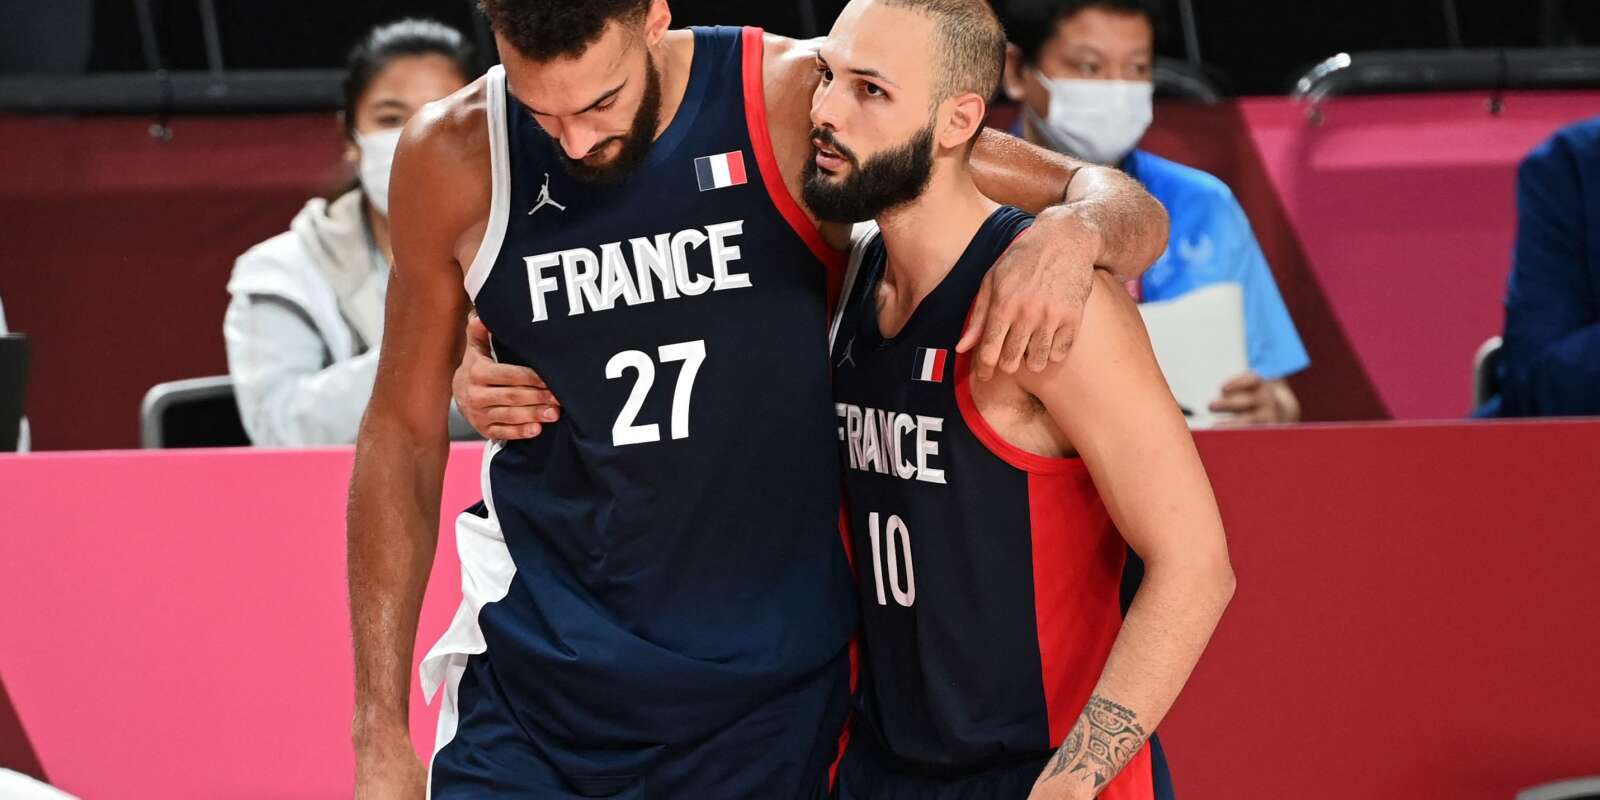 France's Rudy Gobert (L) reacts next to teammate Evan Fournier after France's defeat in the men's final basketball match between France and USA during the Tokyo 2020 Olympic Games at the Saitama Super Arena in Saitama on August 7, 2021. (Photo by Mohd RASFAN / AFP)